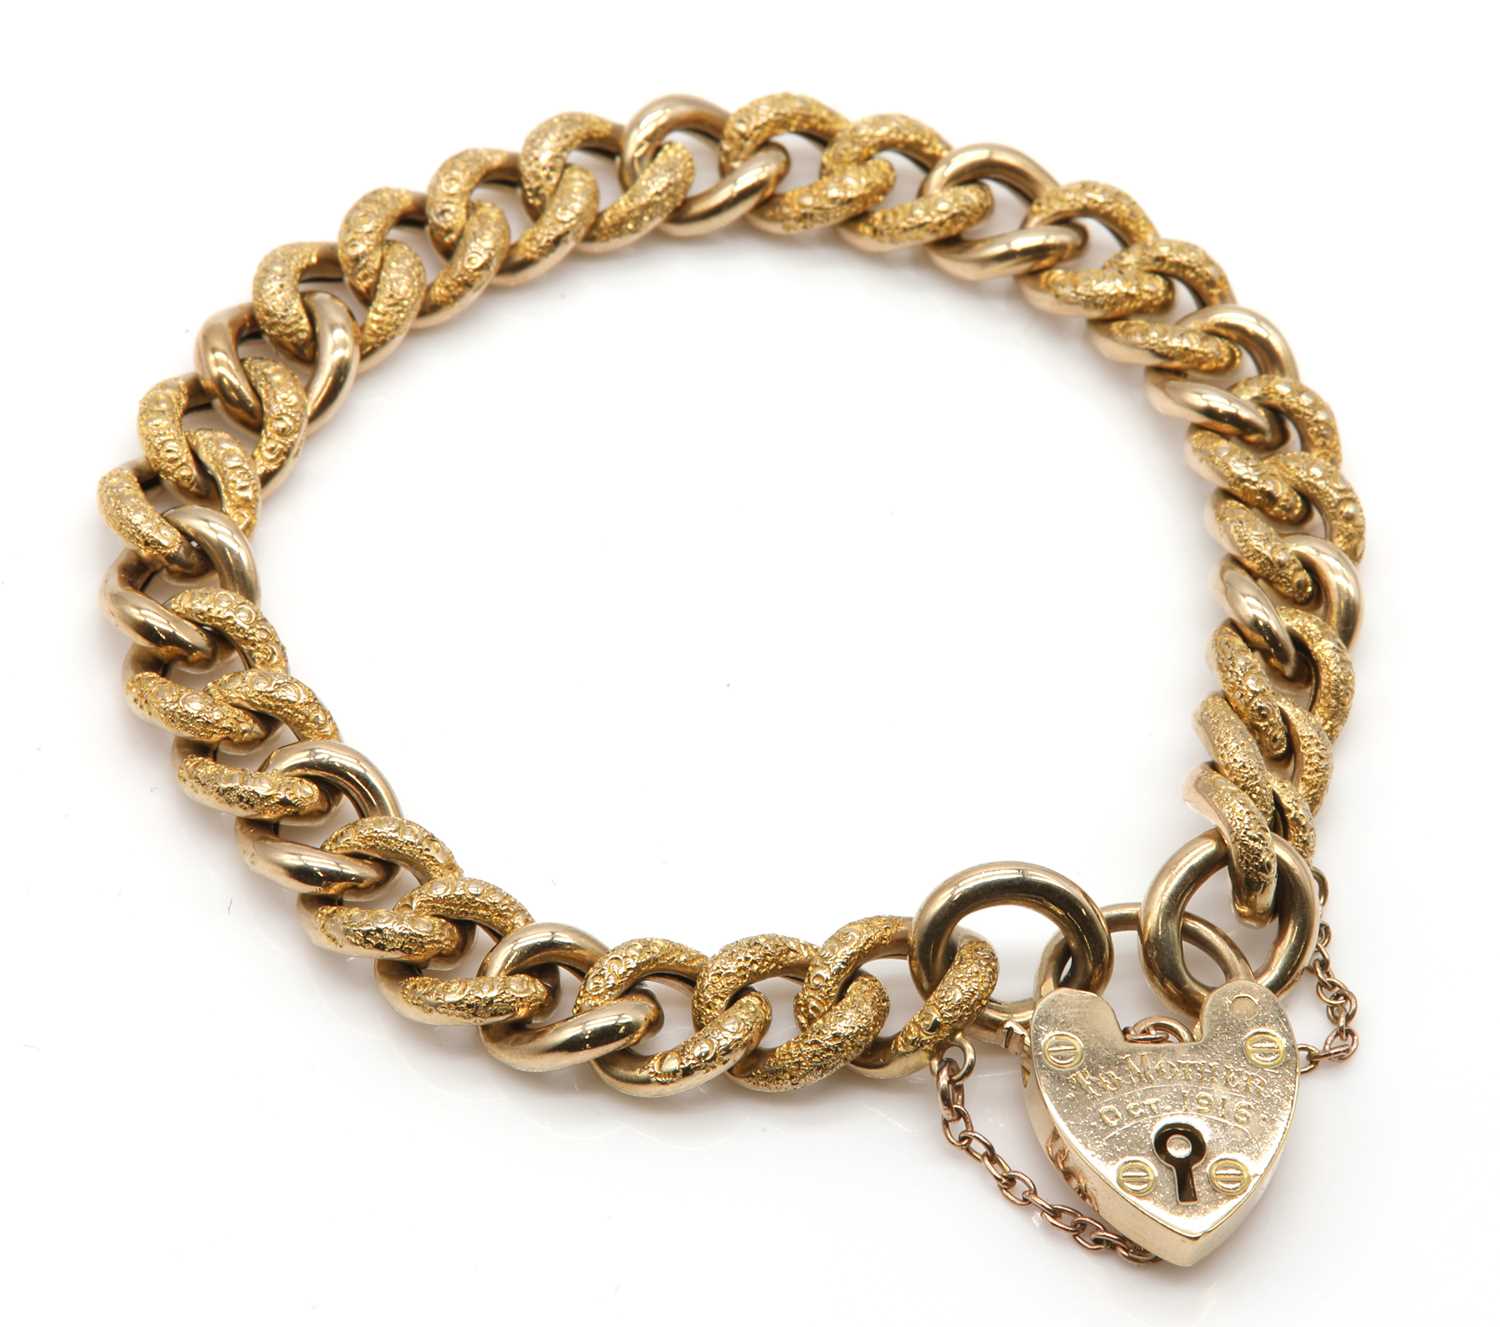 Lot 77 - An early 20th century hollow gold curb chain bracelet